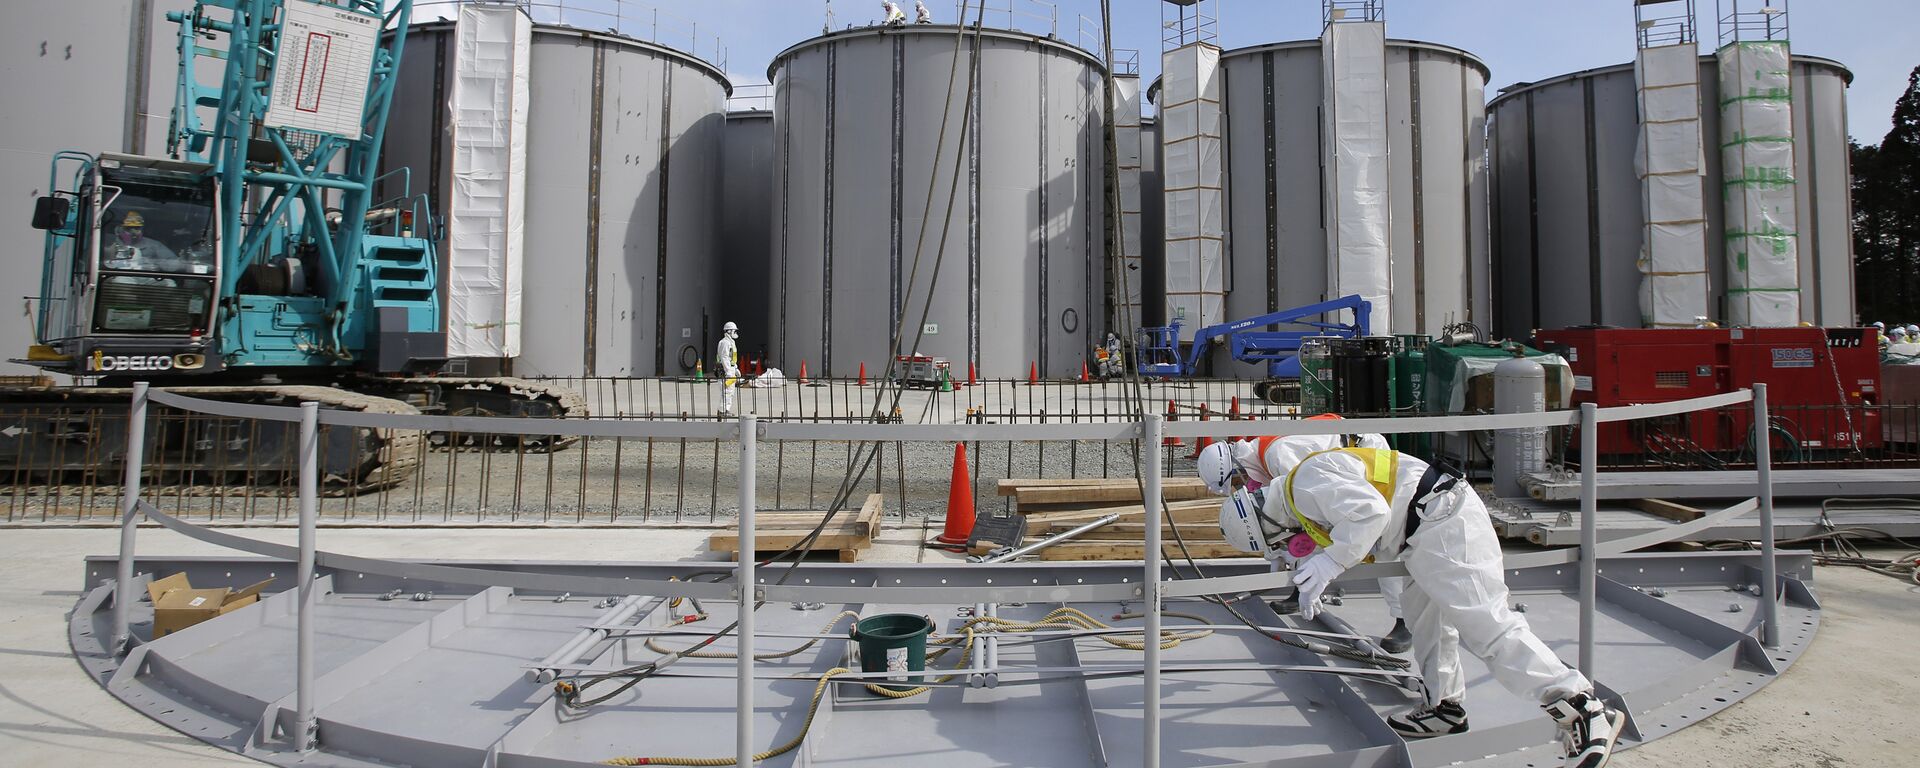 Men wearing protective suits and masks work in front of welding storage tanks for radioactive water, under construction in the J1 area at the Tokyo Electric Power Co's (TEPCO) tsunami-crippled Fukushima Daiichi nuclear power plant in Okuma in Fukushima prefecture. (File) - Sputnik International, 1920, 12.07.2023